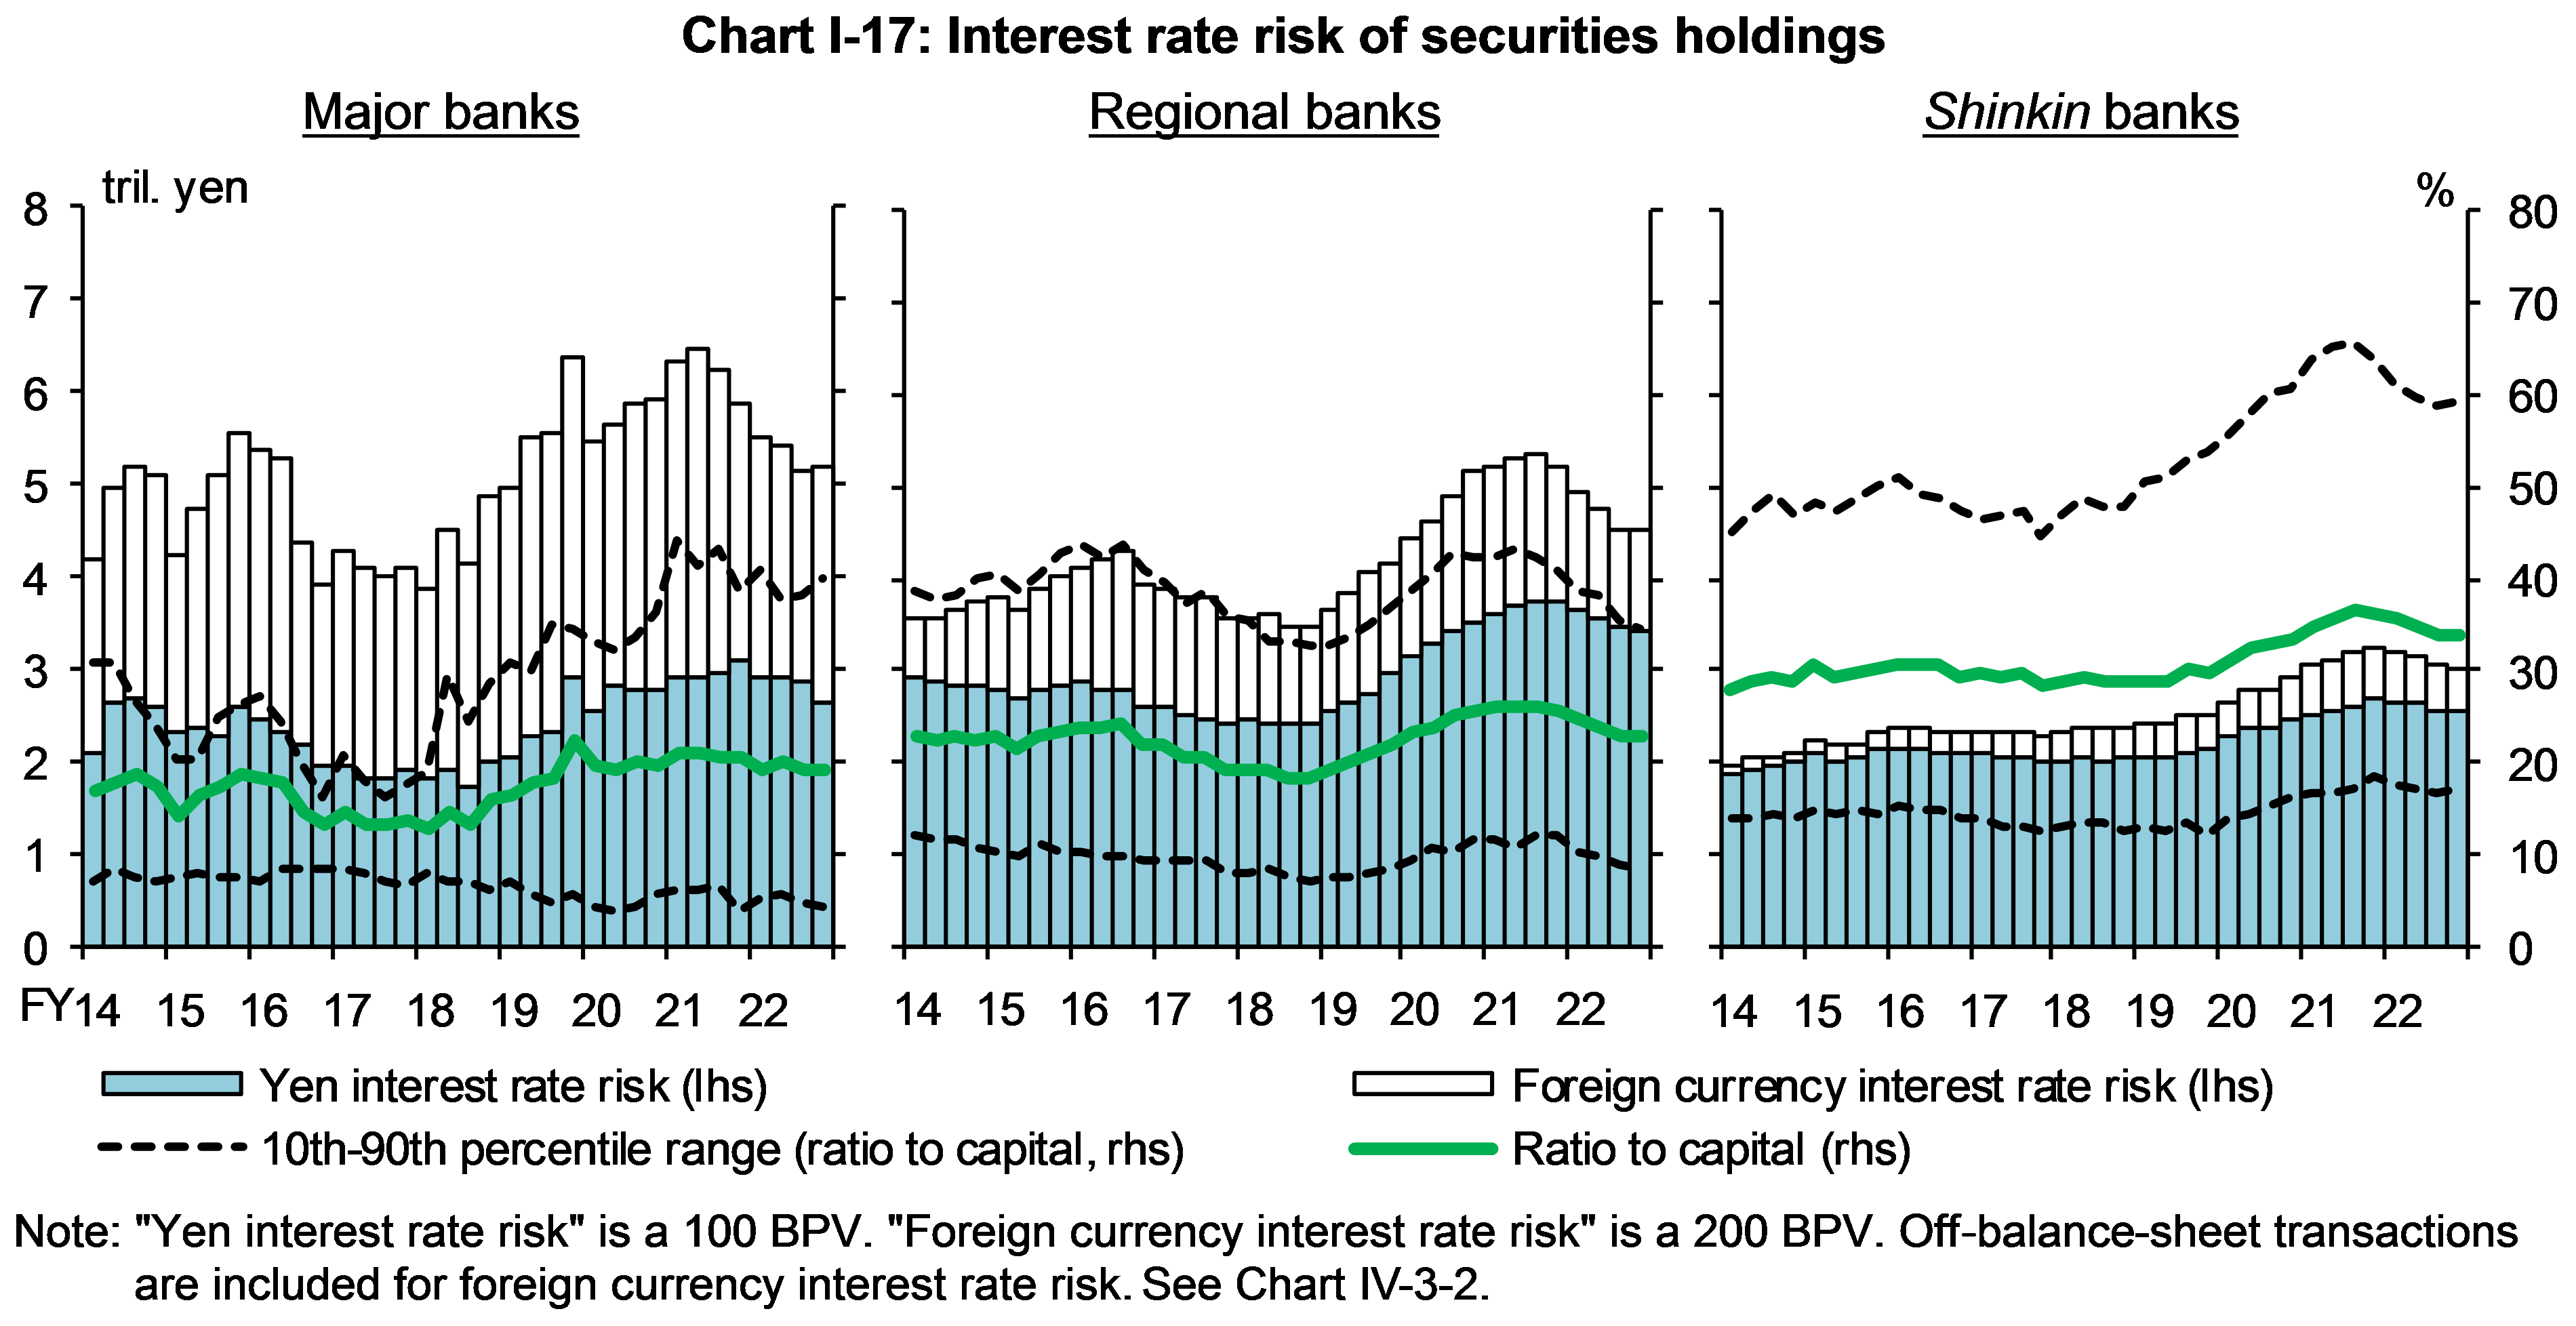 Chart I-17 shows Interest rate risk of securities holdings.